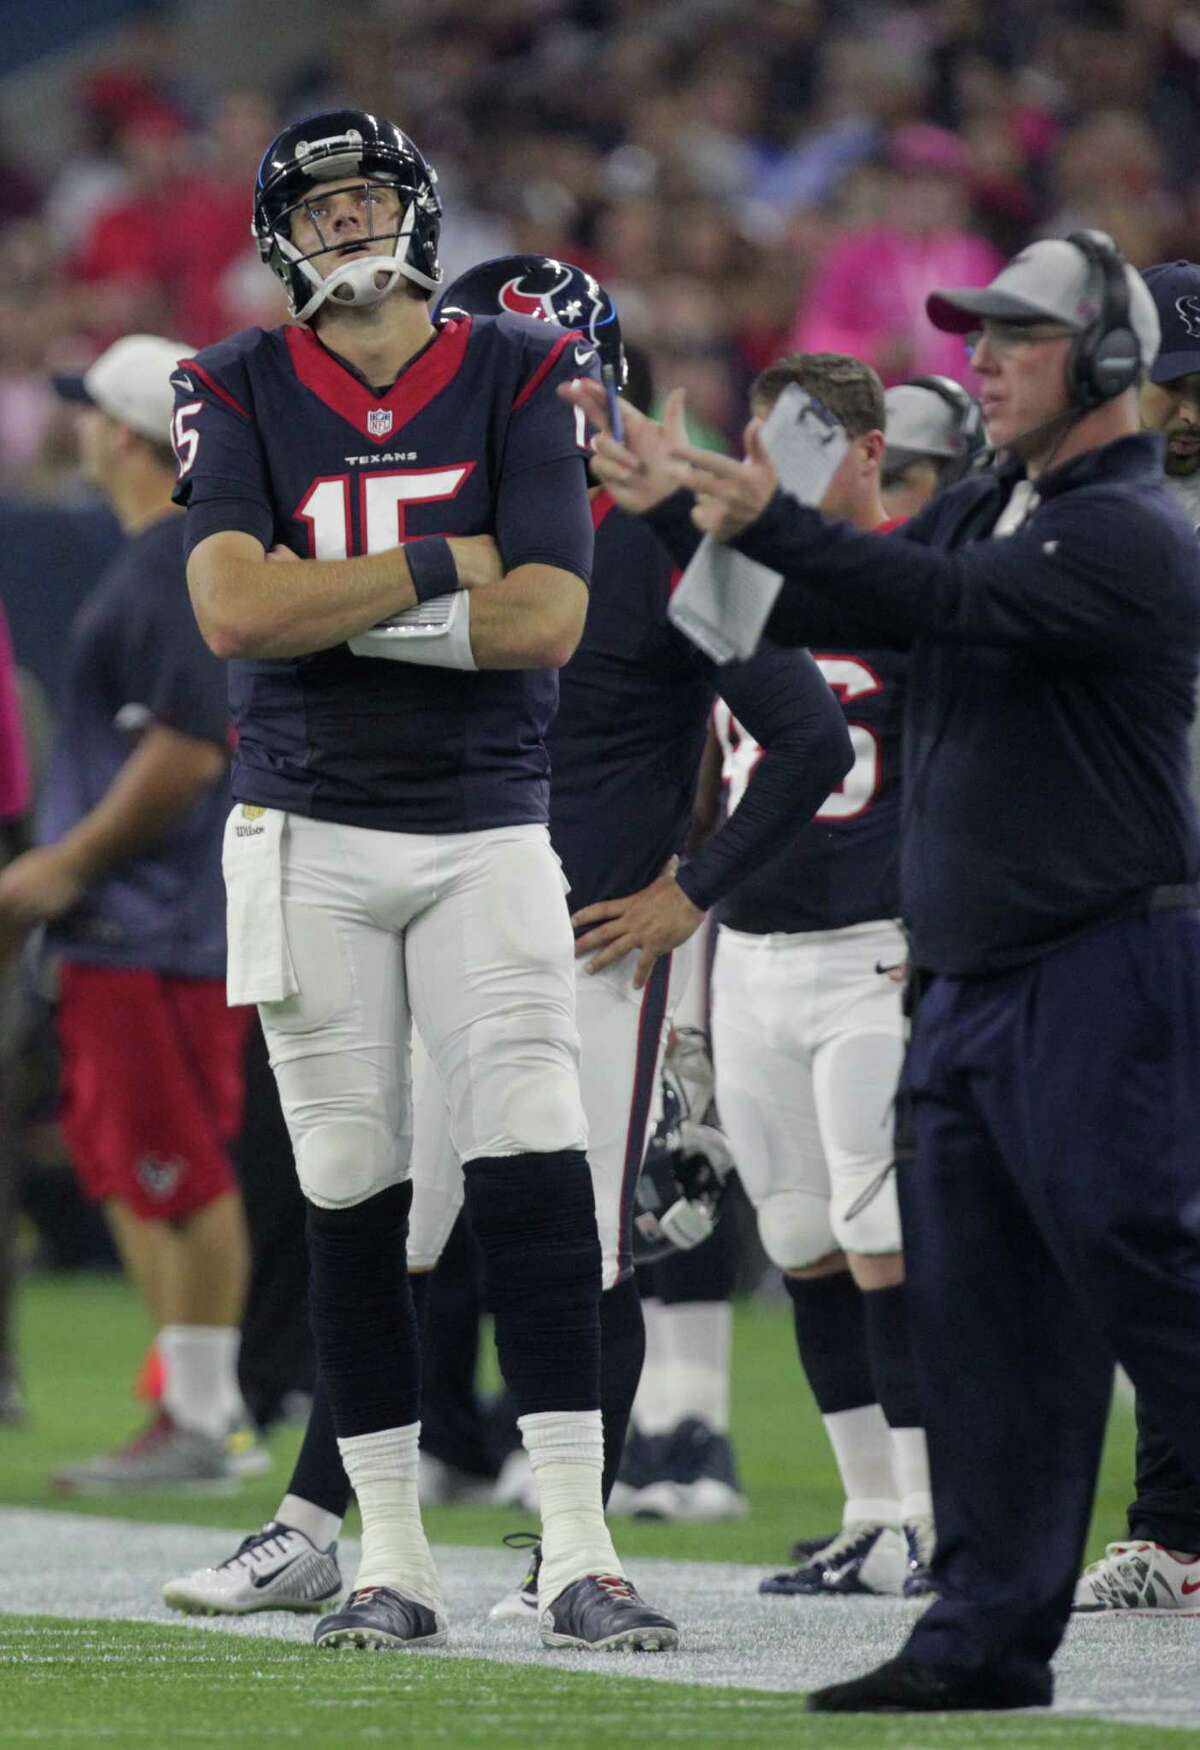 Houston Texans quarterback Ryan Mallett (15) watches from the sidelines after leaving the game after a hit during the second quarter of an NFL football game at NRG Stadium on Thursday, Oct. 8, 2015, in Houston. ( Jon Shapley / Houston Chronicle )